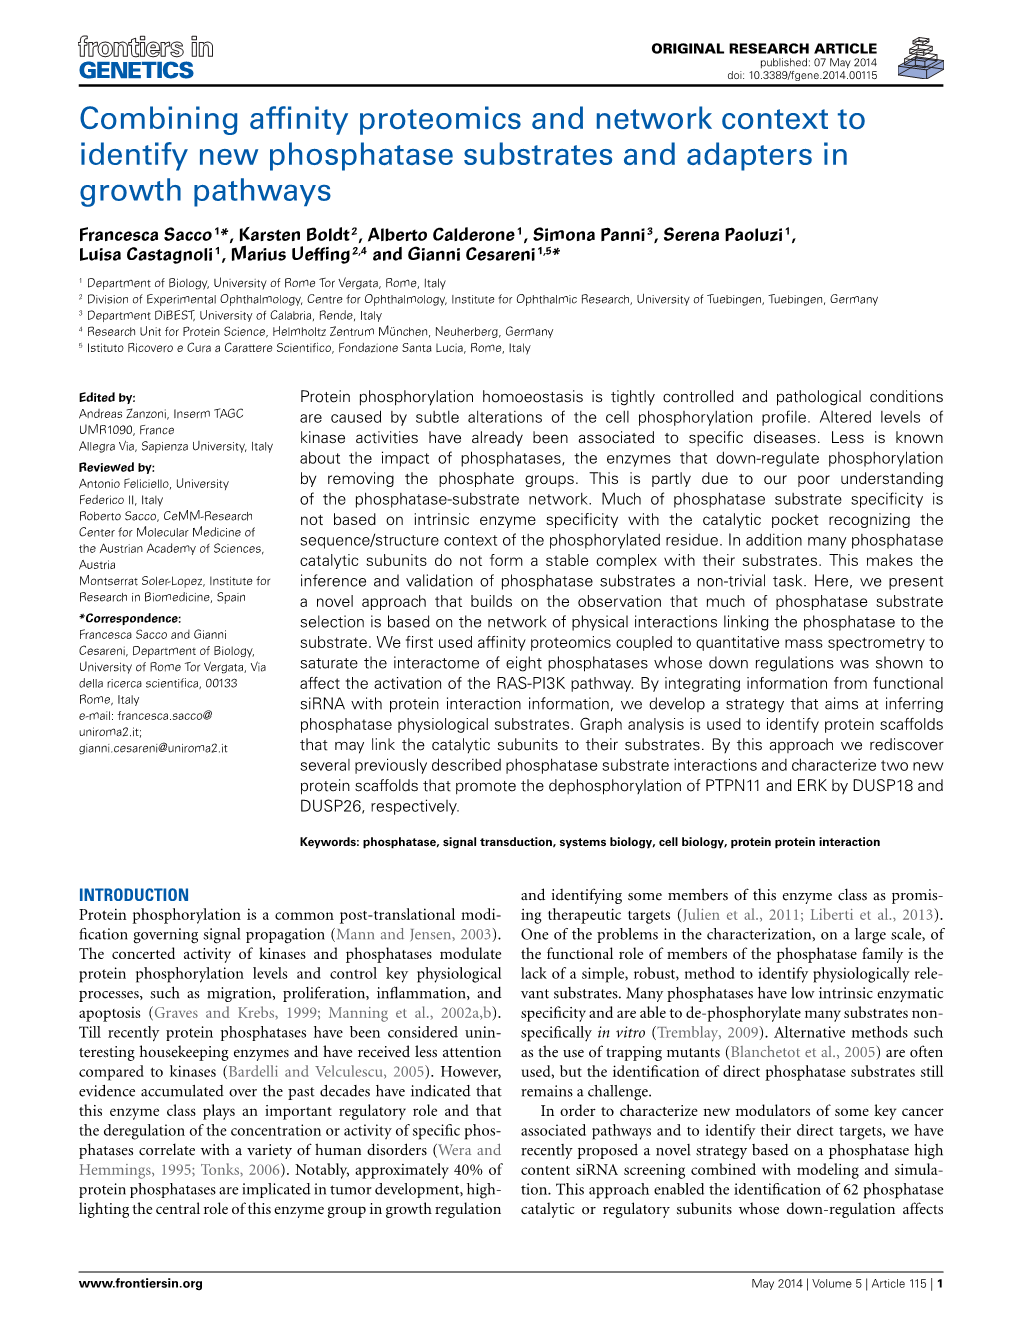 Combining Affinity Proteomics and Network Context to Identify New Phosphatase Substrates and Adapters in Growth Pathways